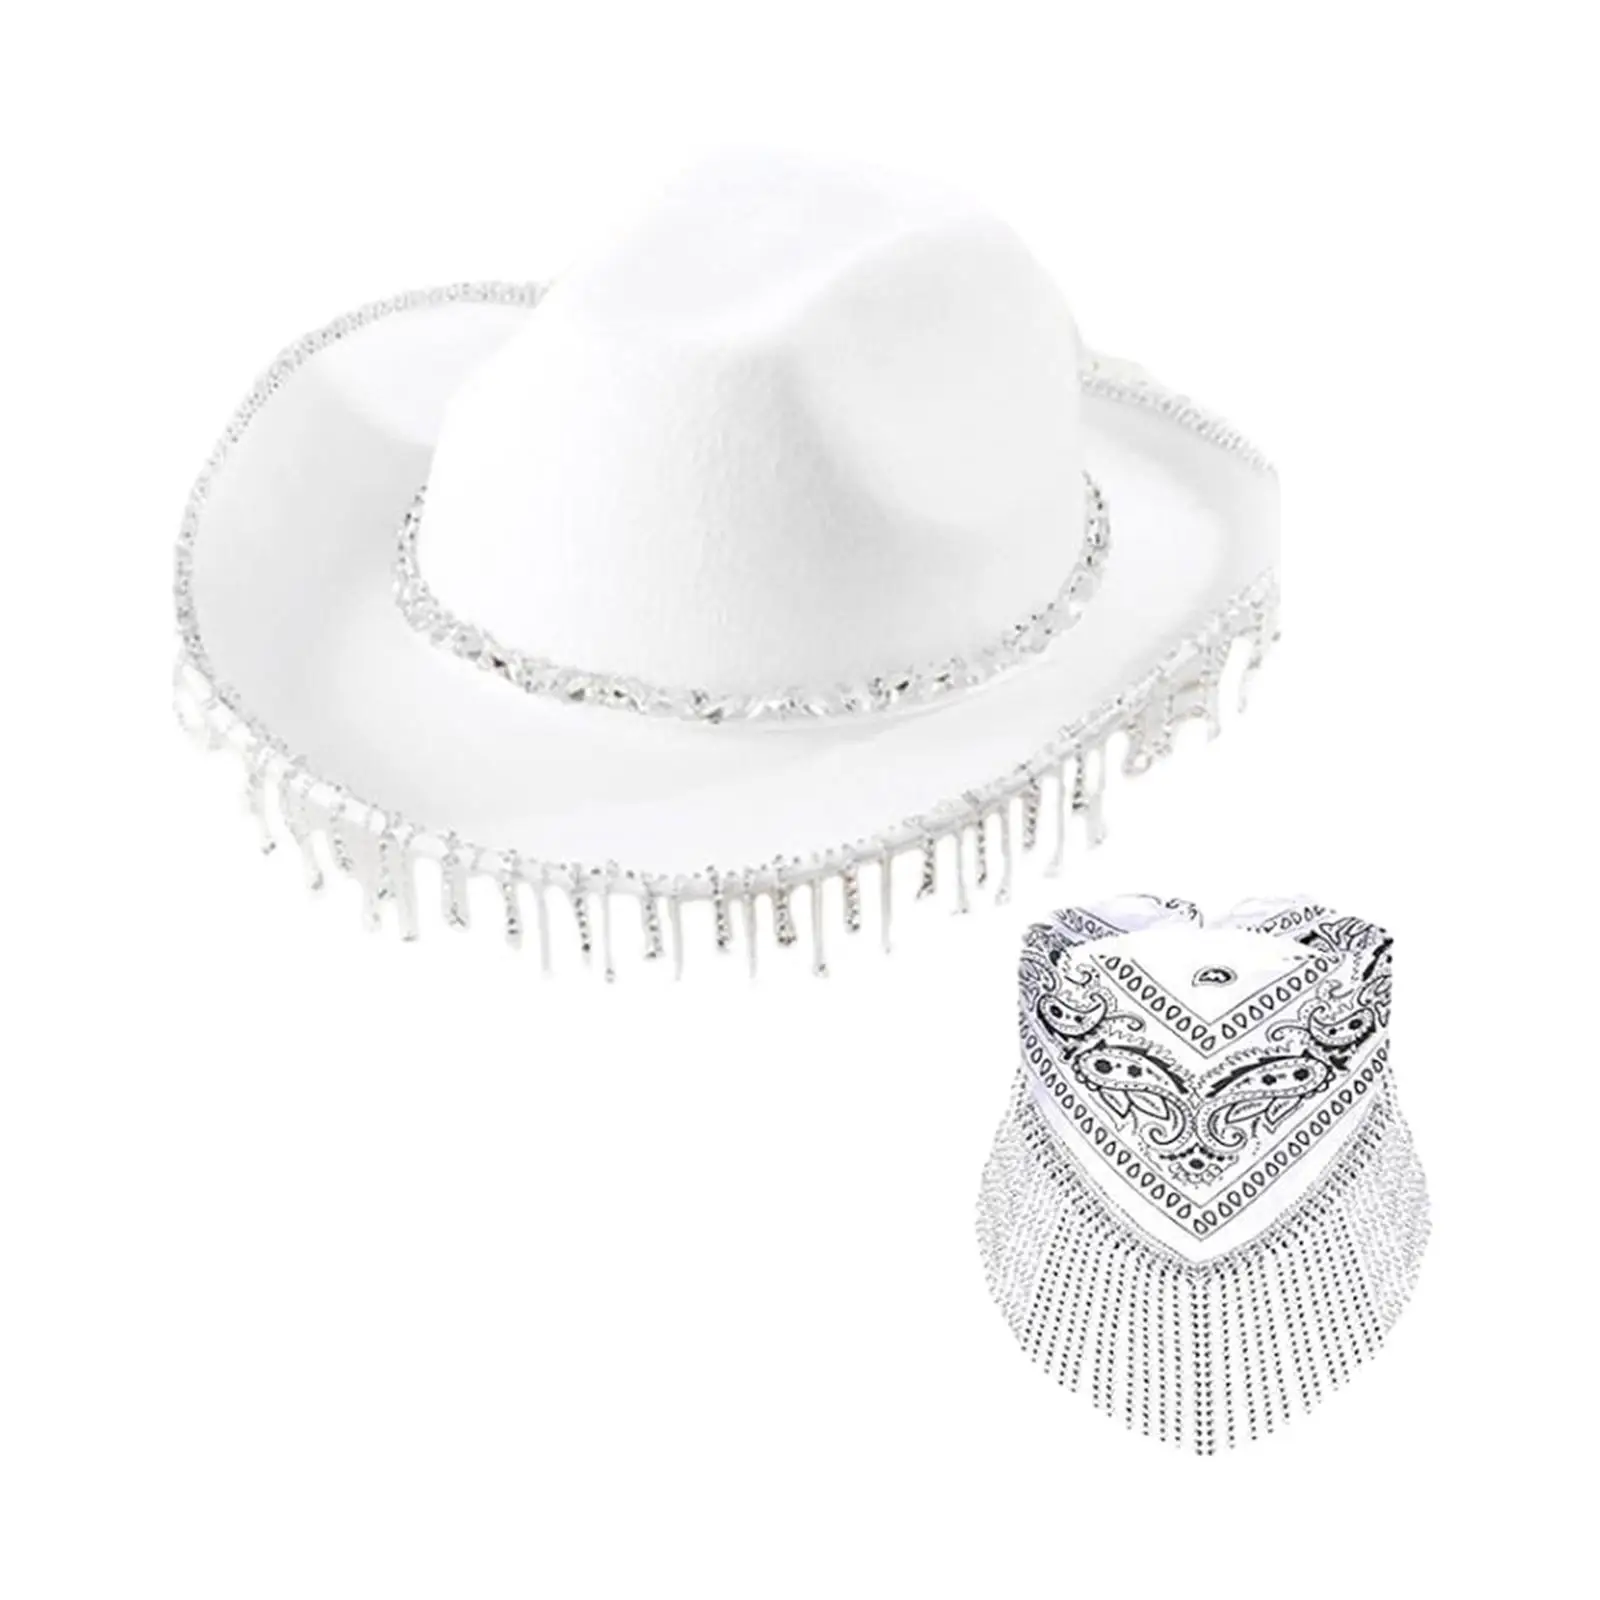 Cowboy Hat with Fringed Bandana Sun Hat Bling Tassels Big Brim Cap Cowgirl Hat for Women Men Party Holiday Summer Beach Carnival